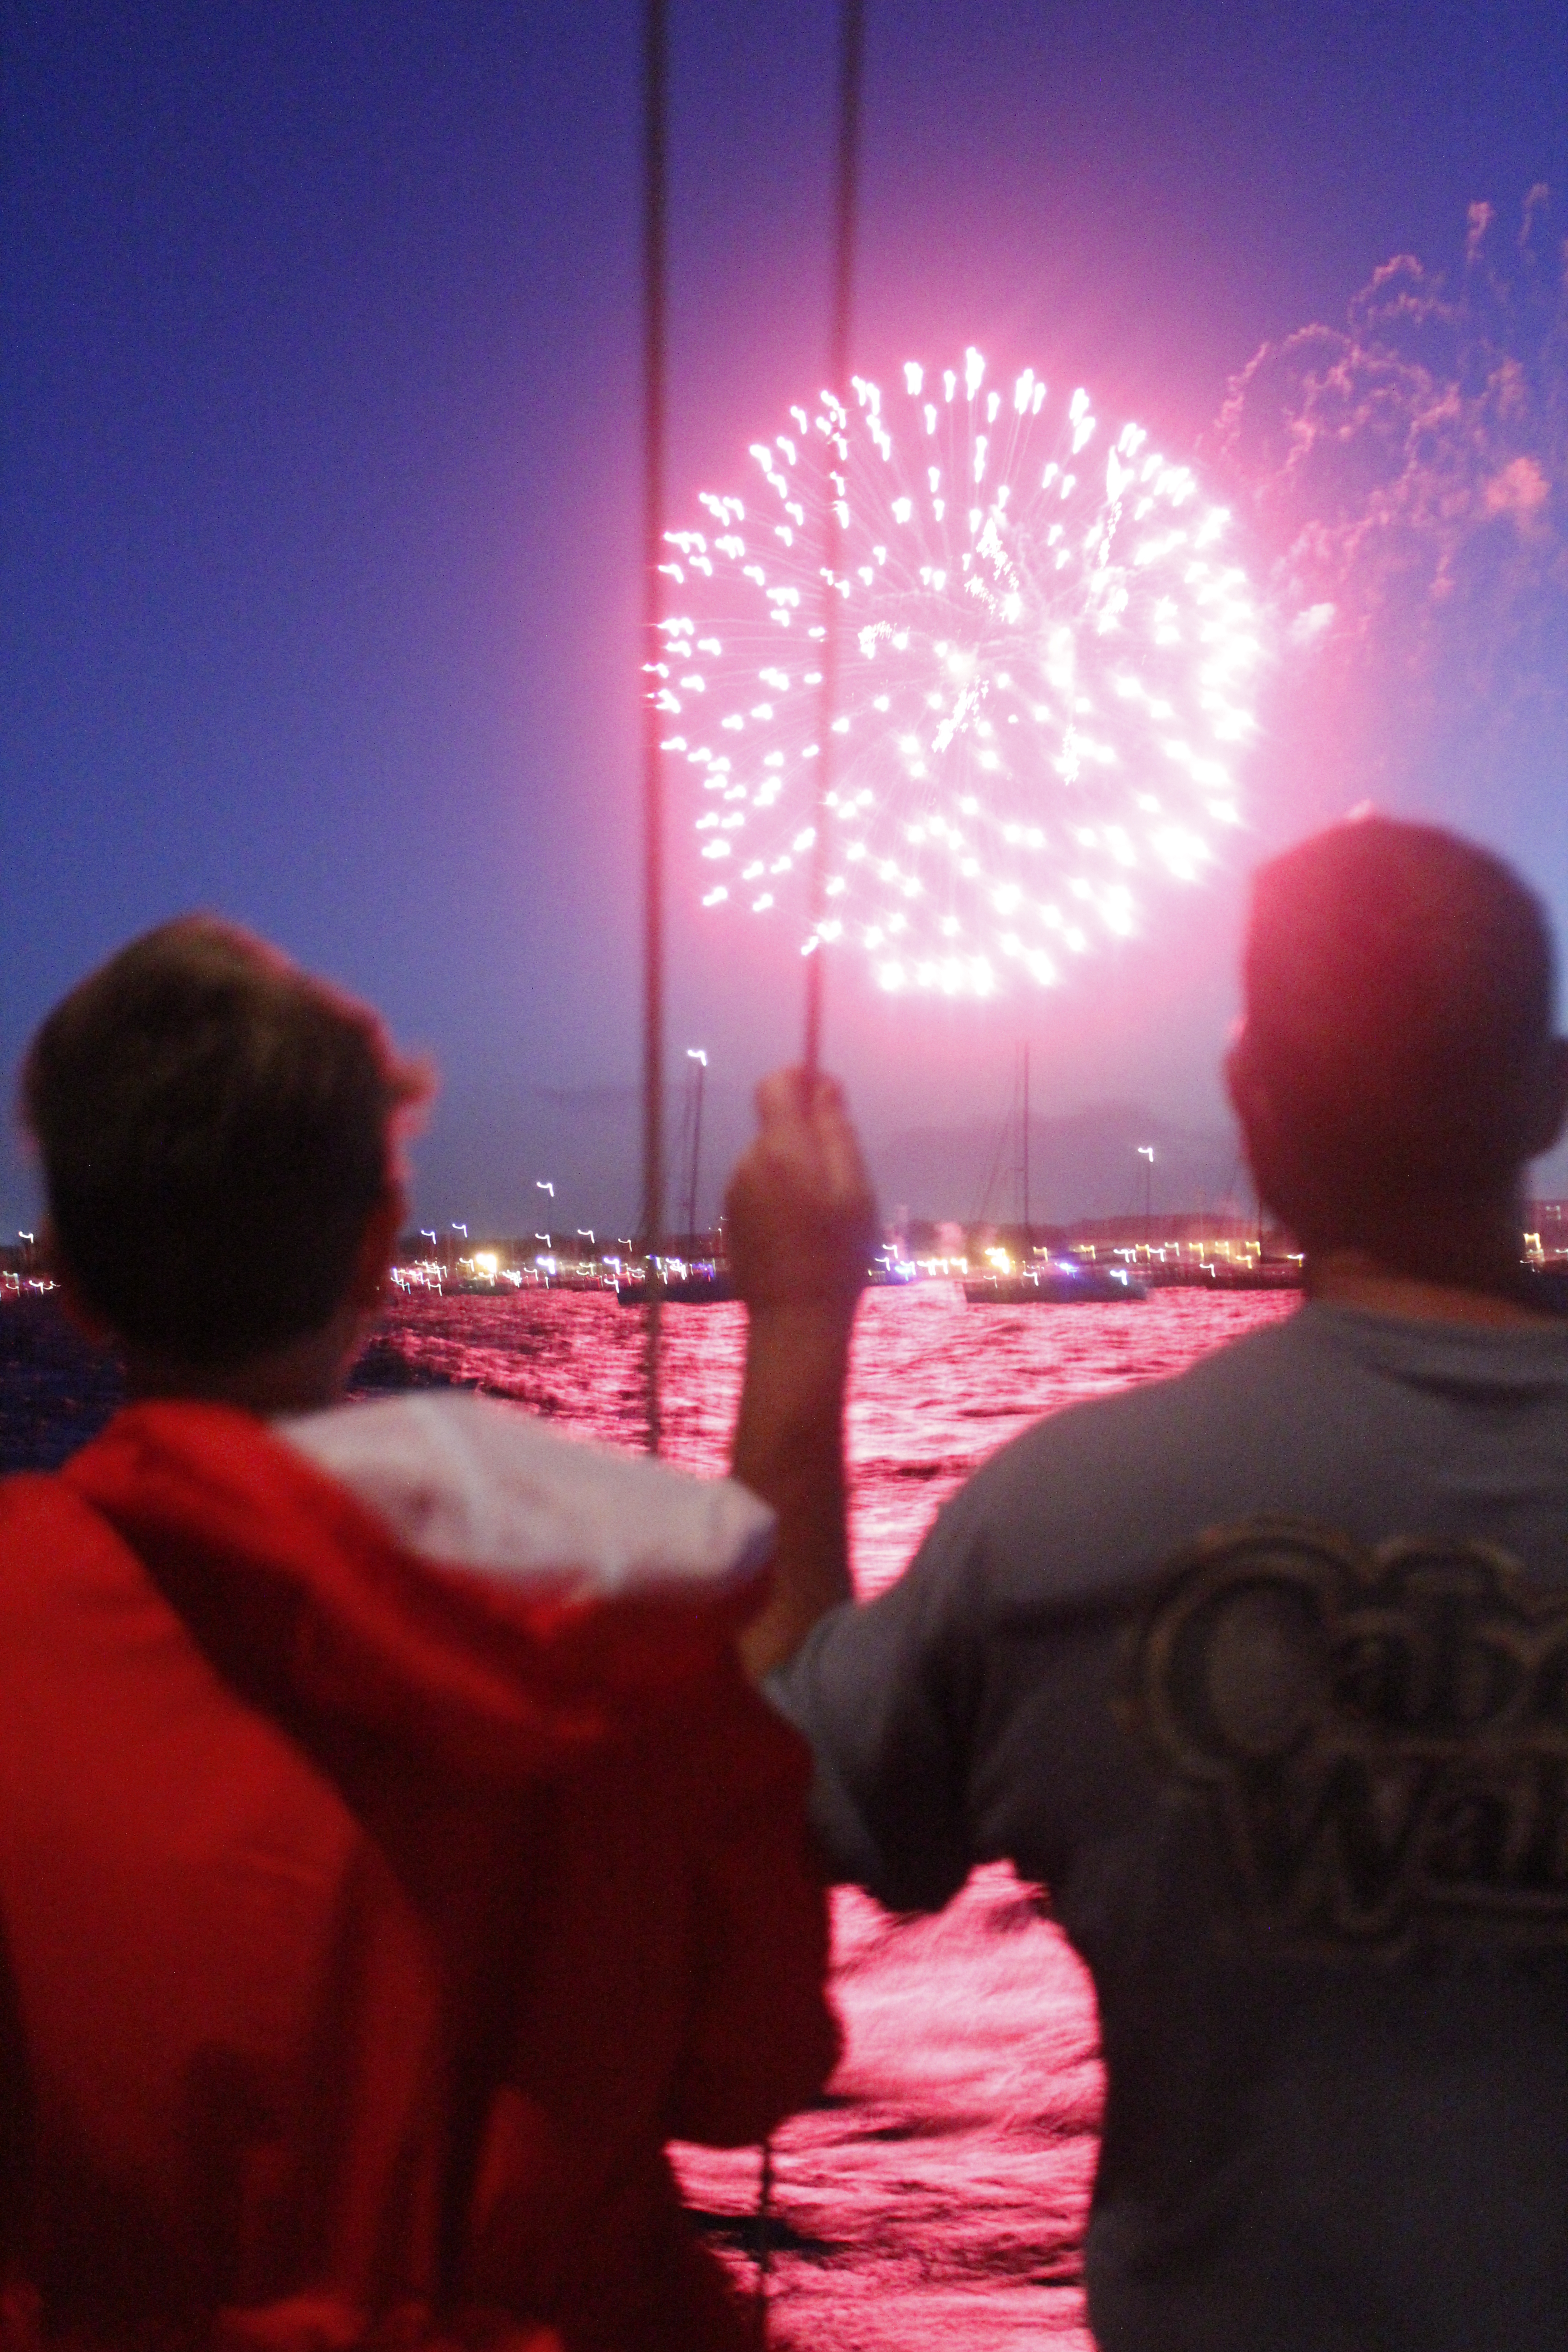 Watching Fourth of July fireworks from the schooner in the harbor